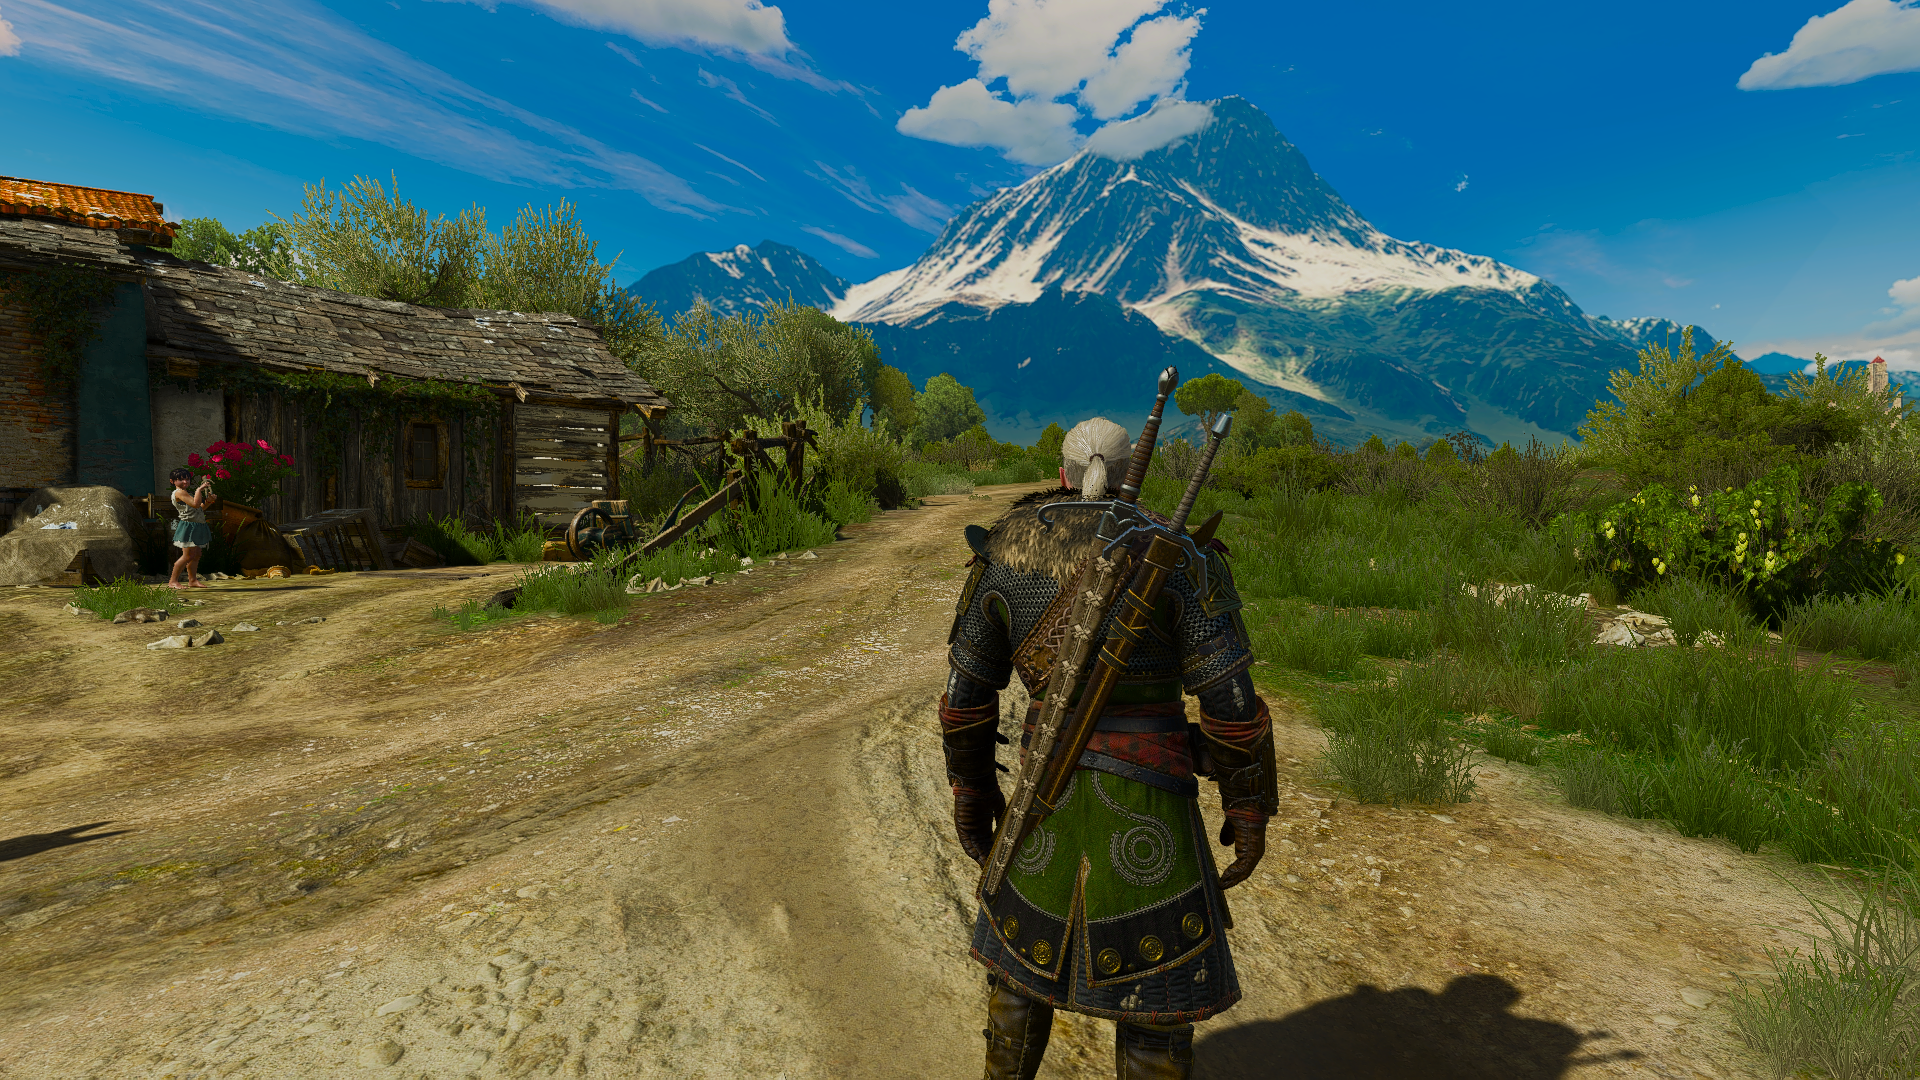 The Witcher 3 Wild Hunt The Witcher Video Game Landscape Video Games RPG PC Gaming Screen Shot 1920x1080